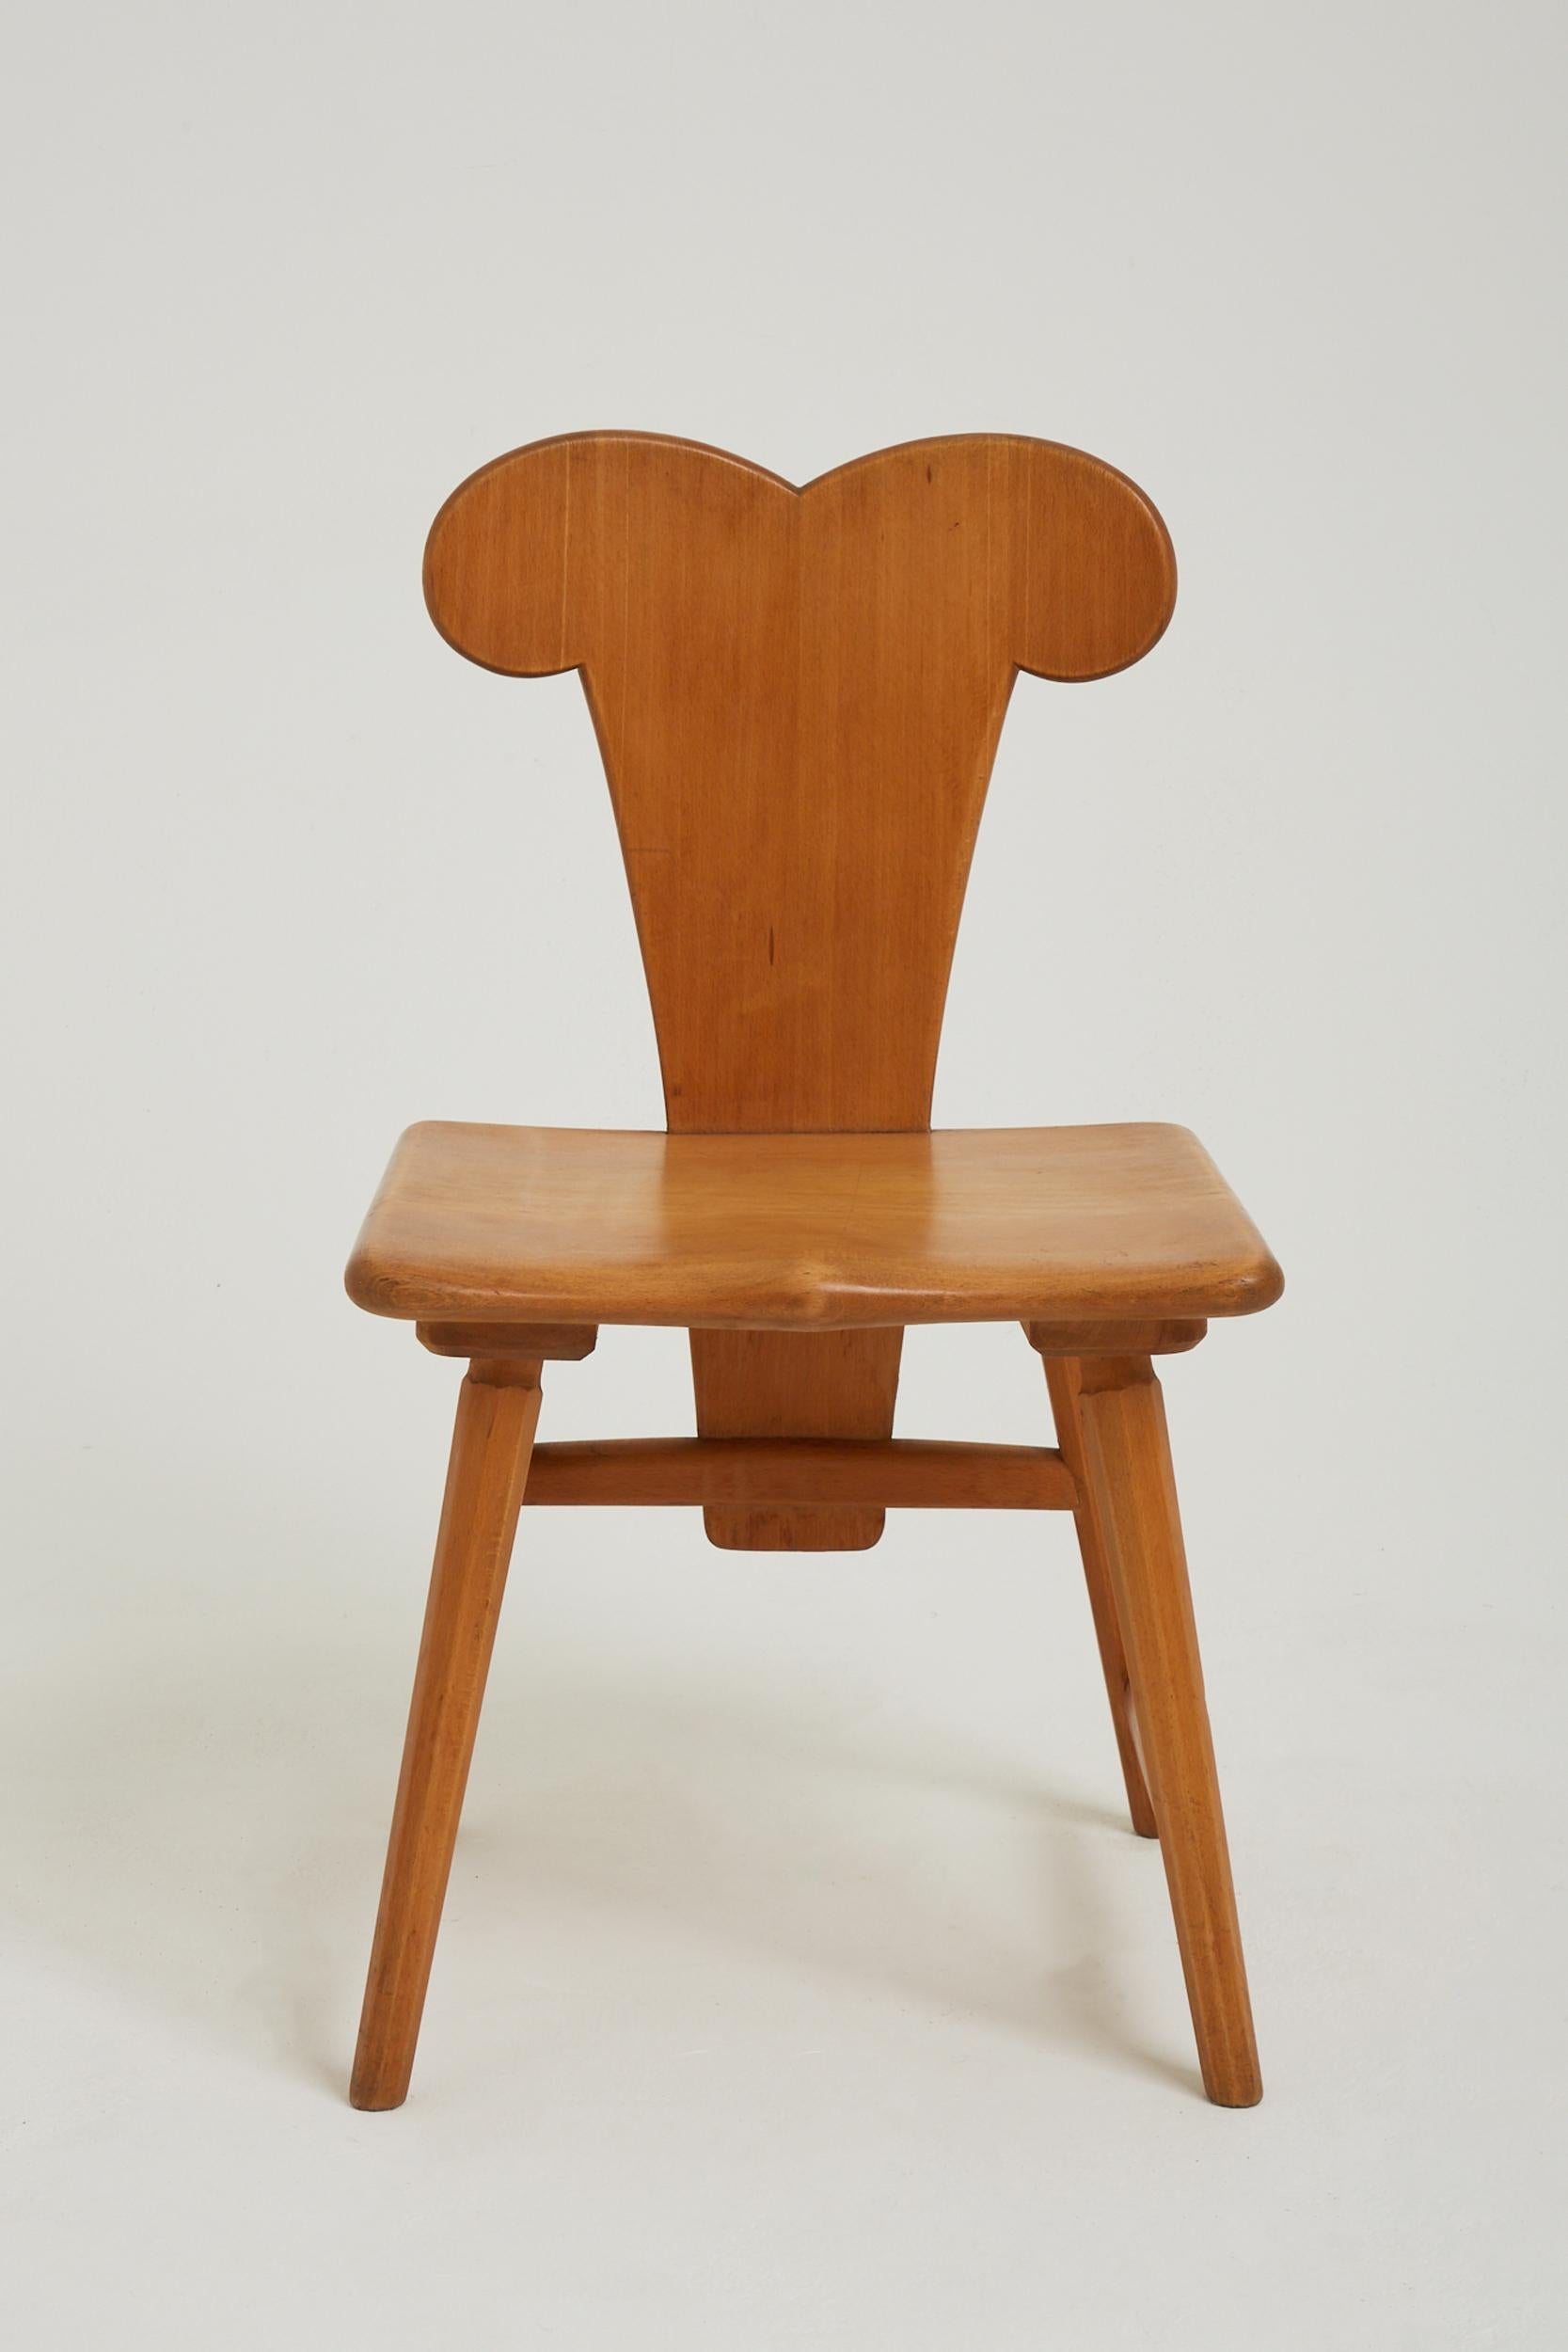 Pair of Cloverleaf Chairs by Möbel Simmen, 1937 For Sale at 1stDibs